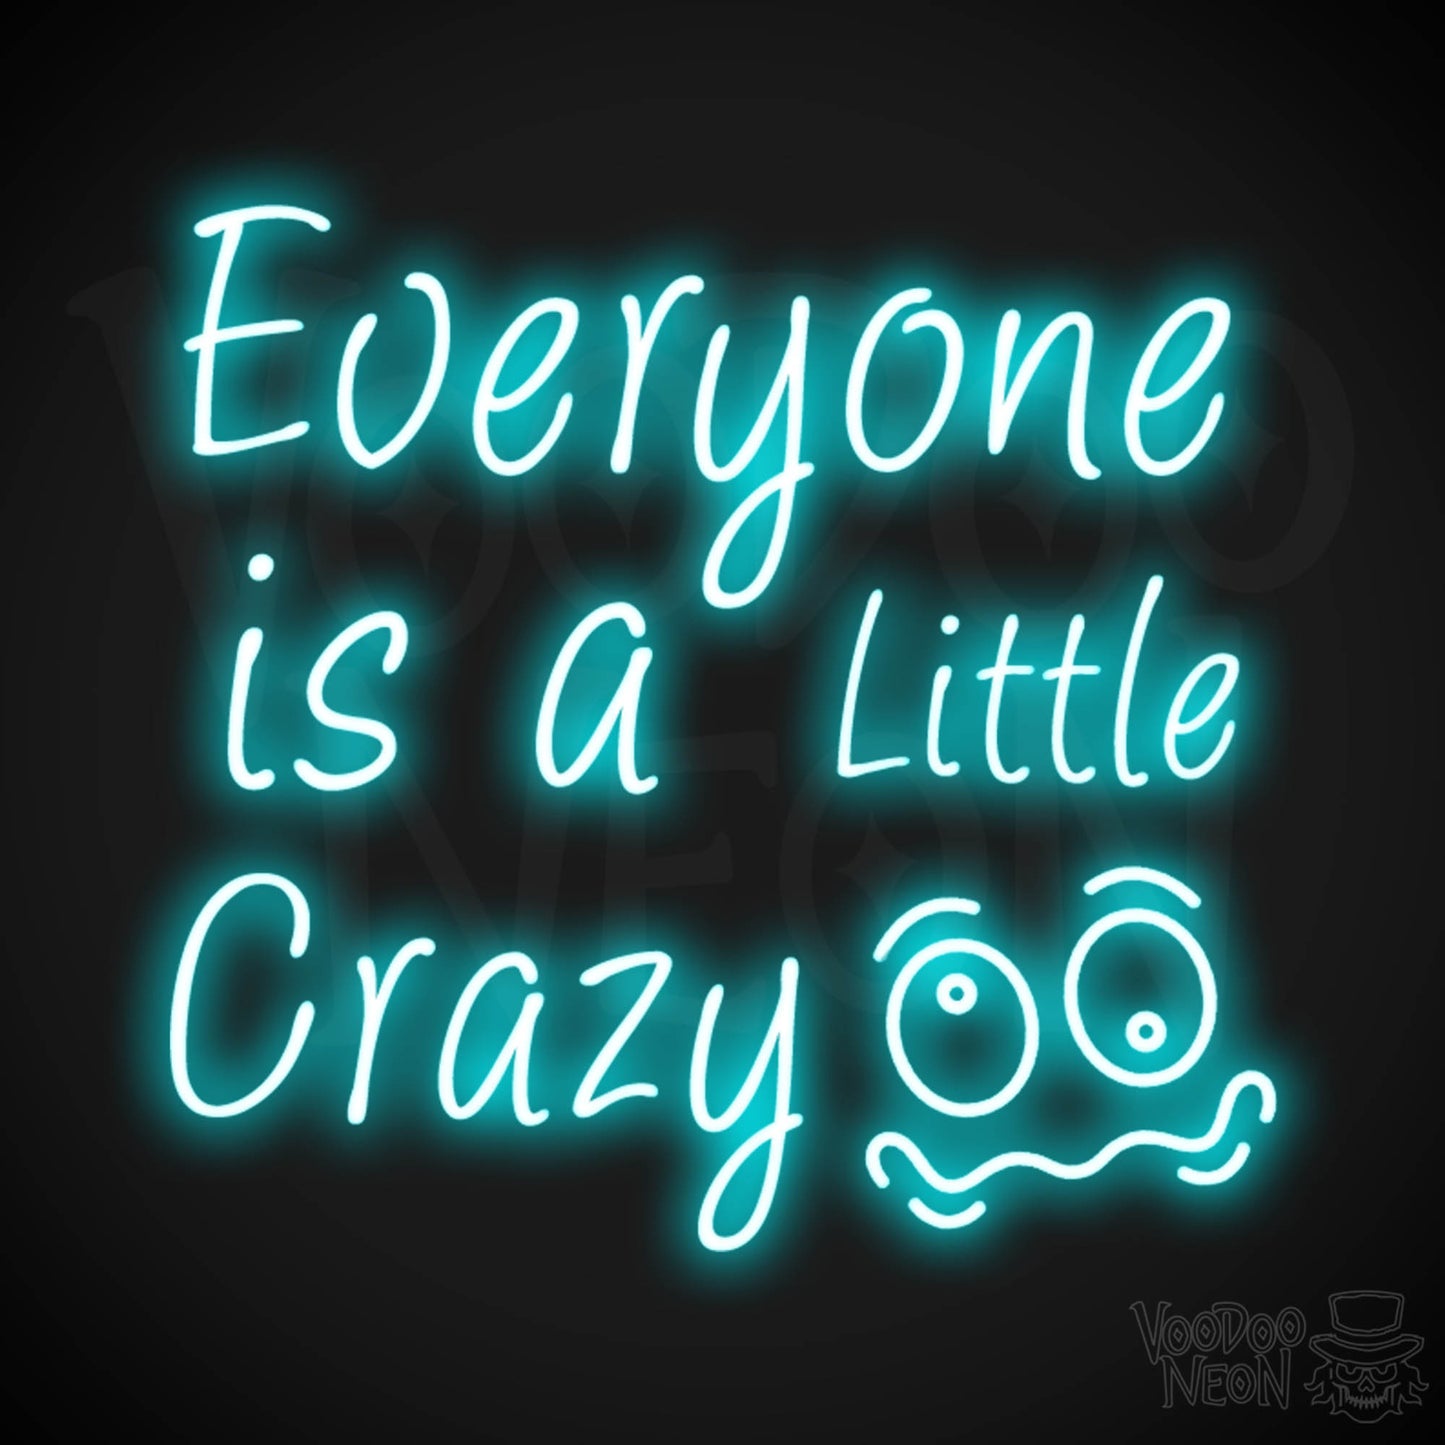 Everyone Is A Little Crazy Neon Sign - Neon Everyone Is A Little Crazy Sign - Color Ice Blue